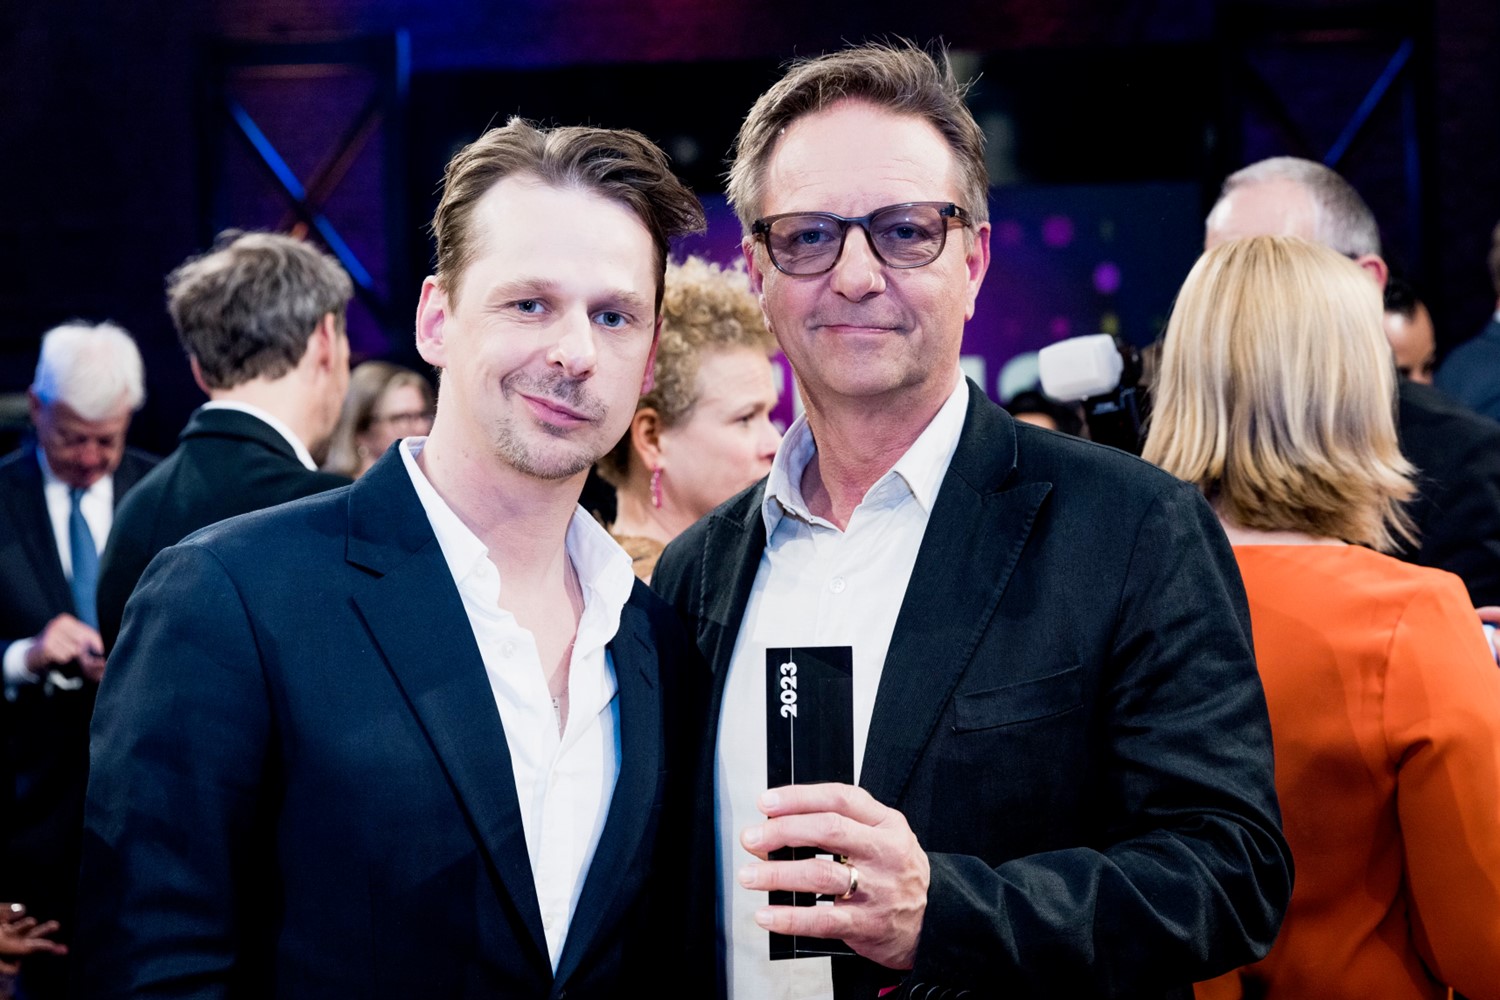 Actor Peter Viitanen and producer Patrick Ryborn accepts CIVIS Media Prize for The Lost.